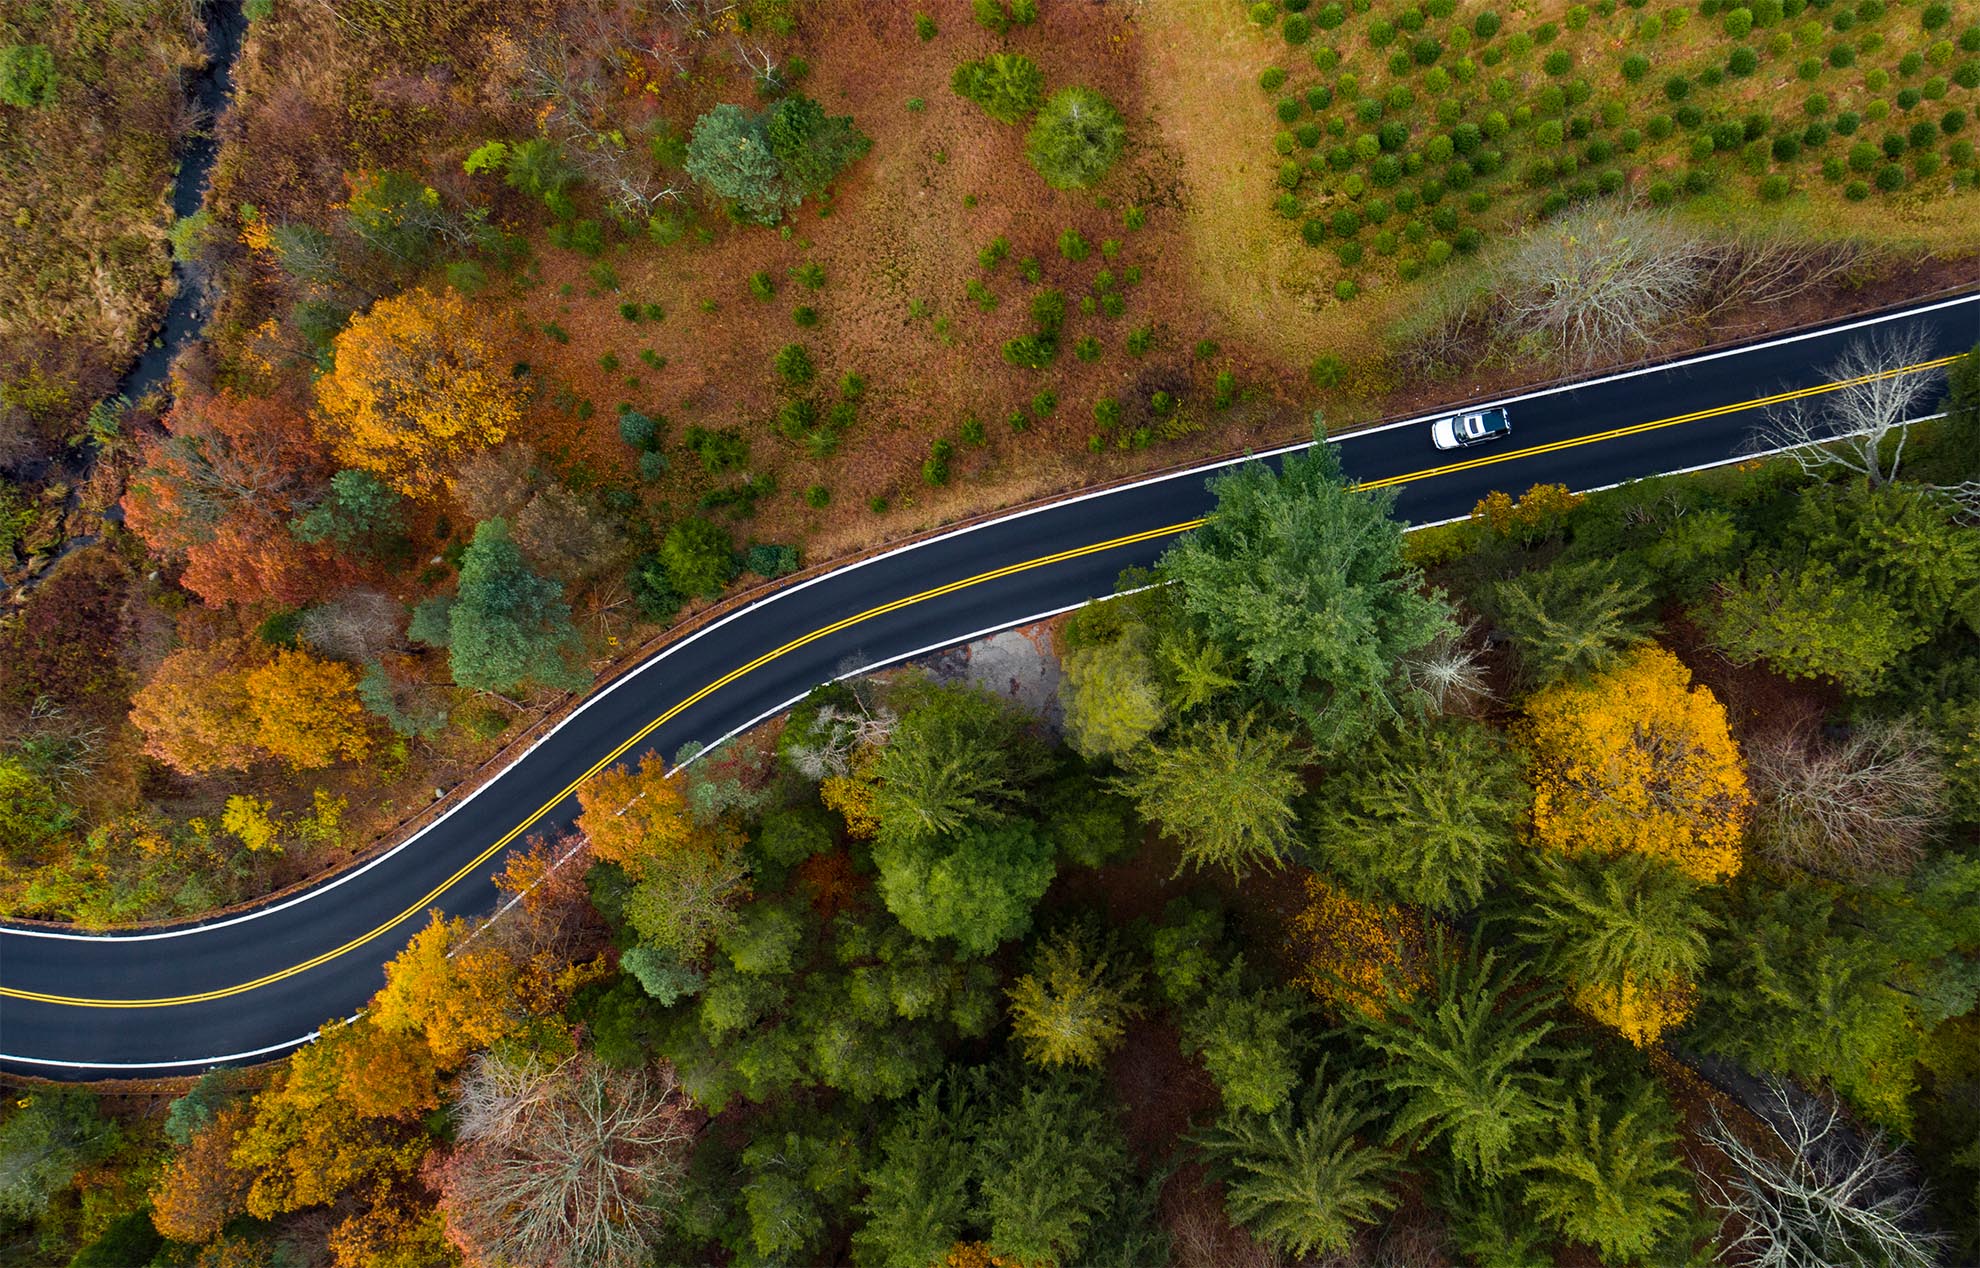 Photograph of a birds eye view of a car on an Autumn road in NJ taken with a drone